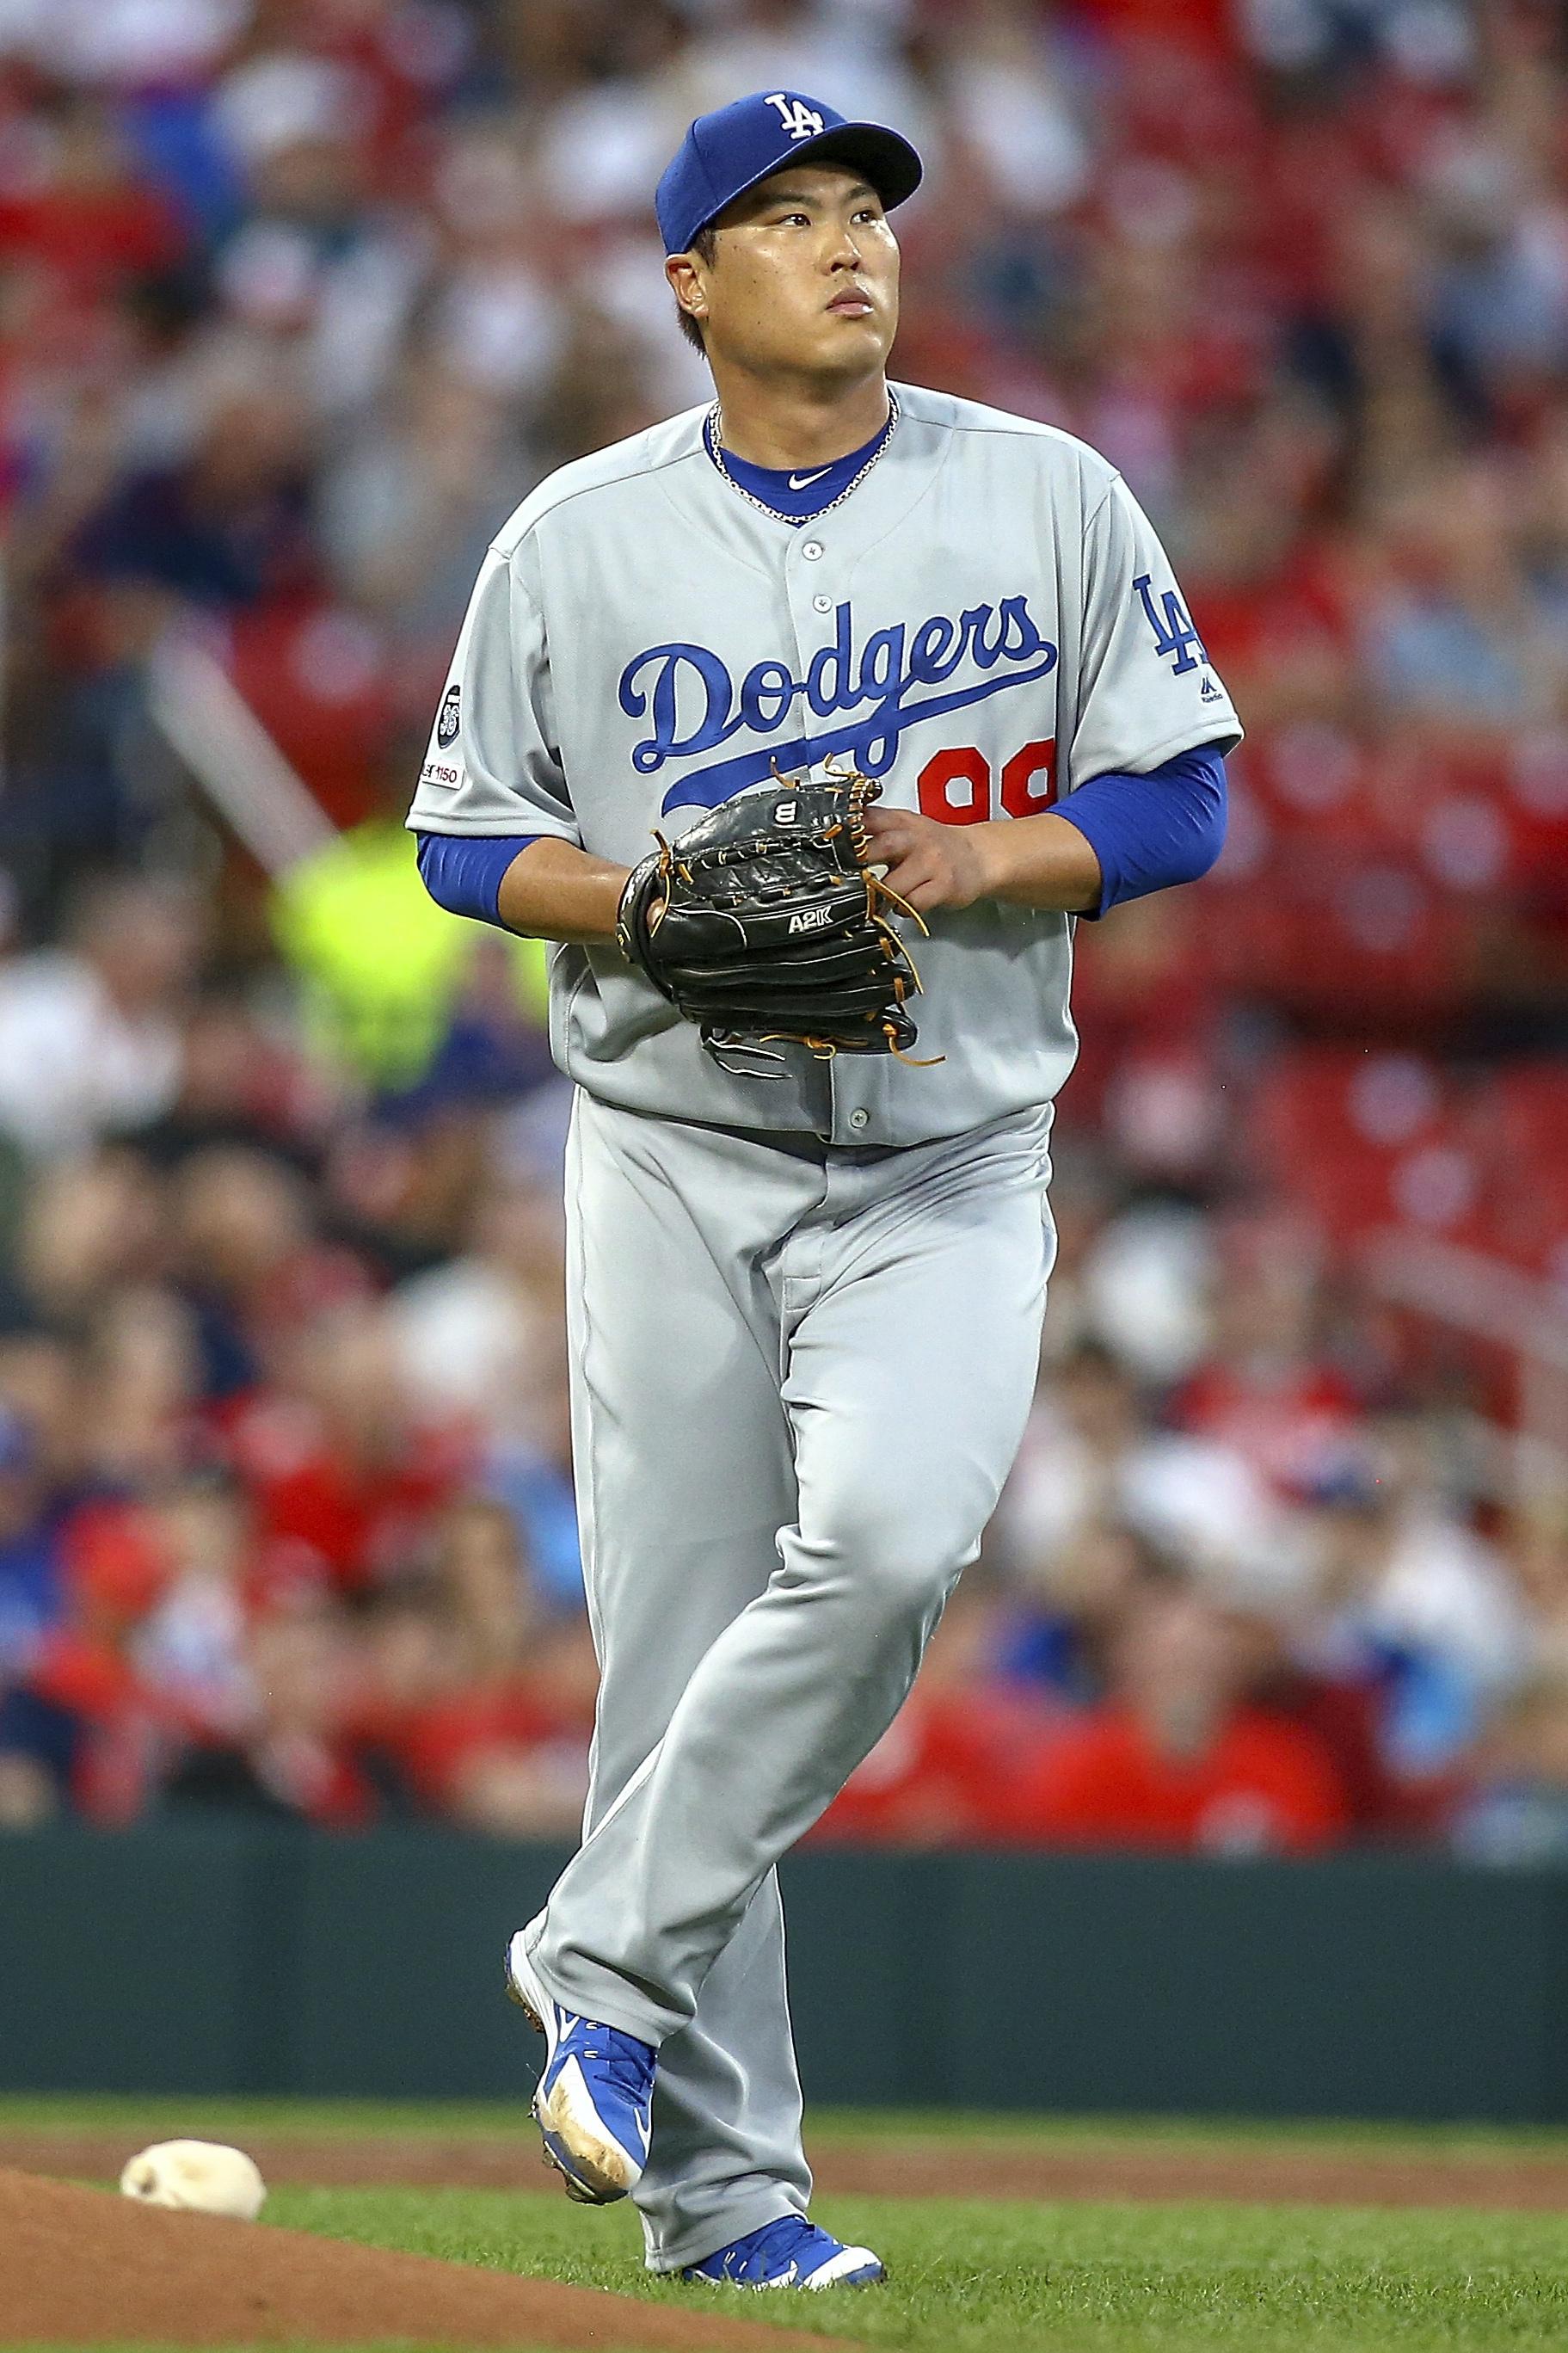 Dodgers' pitcher Ryu Hyun-jin in love with sportscaster - The